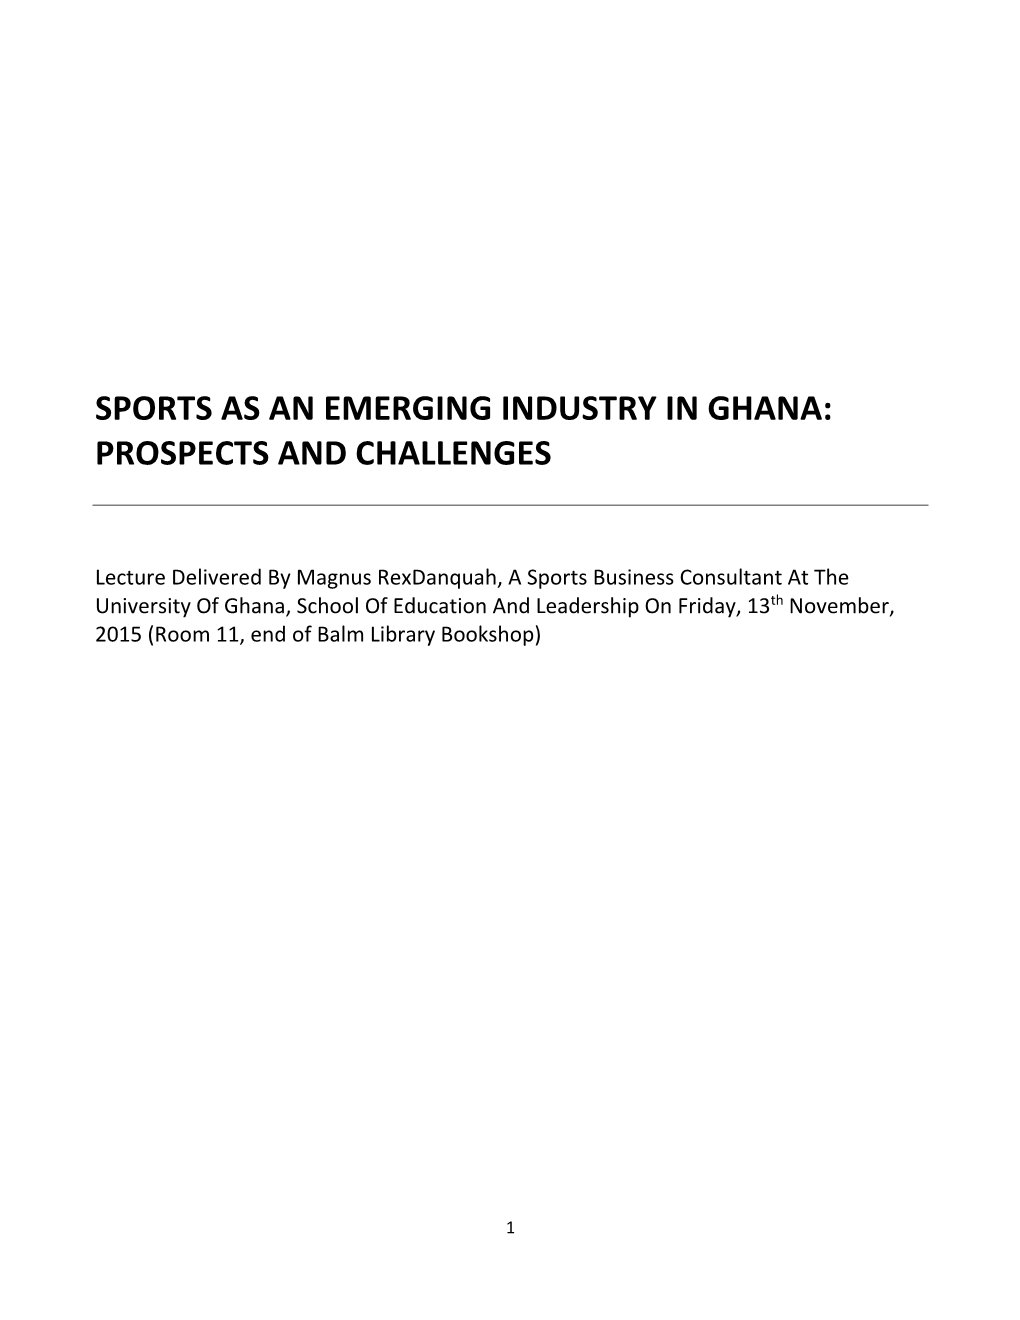 Sports As an Emerging Industry in Ghana: Prospects and Challenges